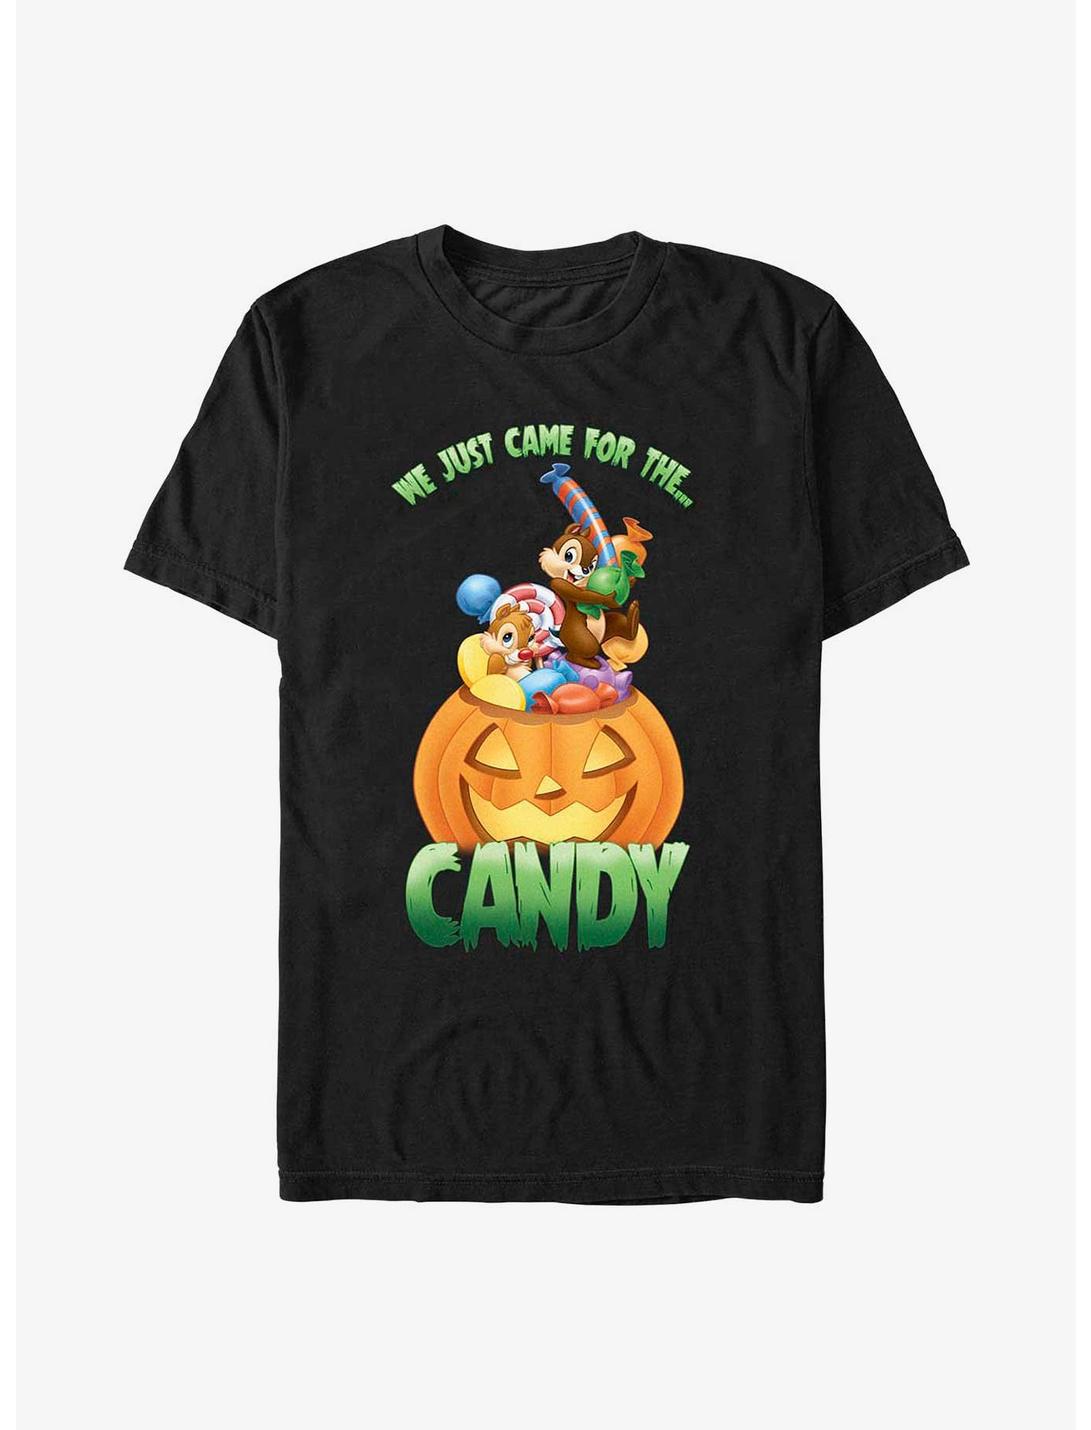 Disney Chip 'n' Dale We Just Came For The Candy T-Shirt, BLACK, hi-res